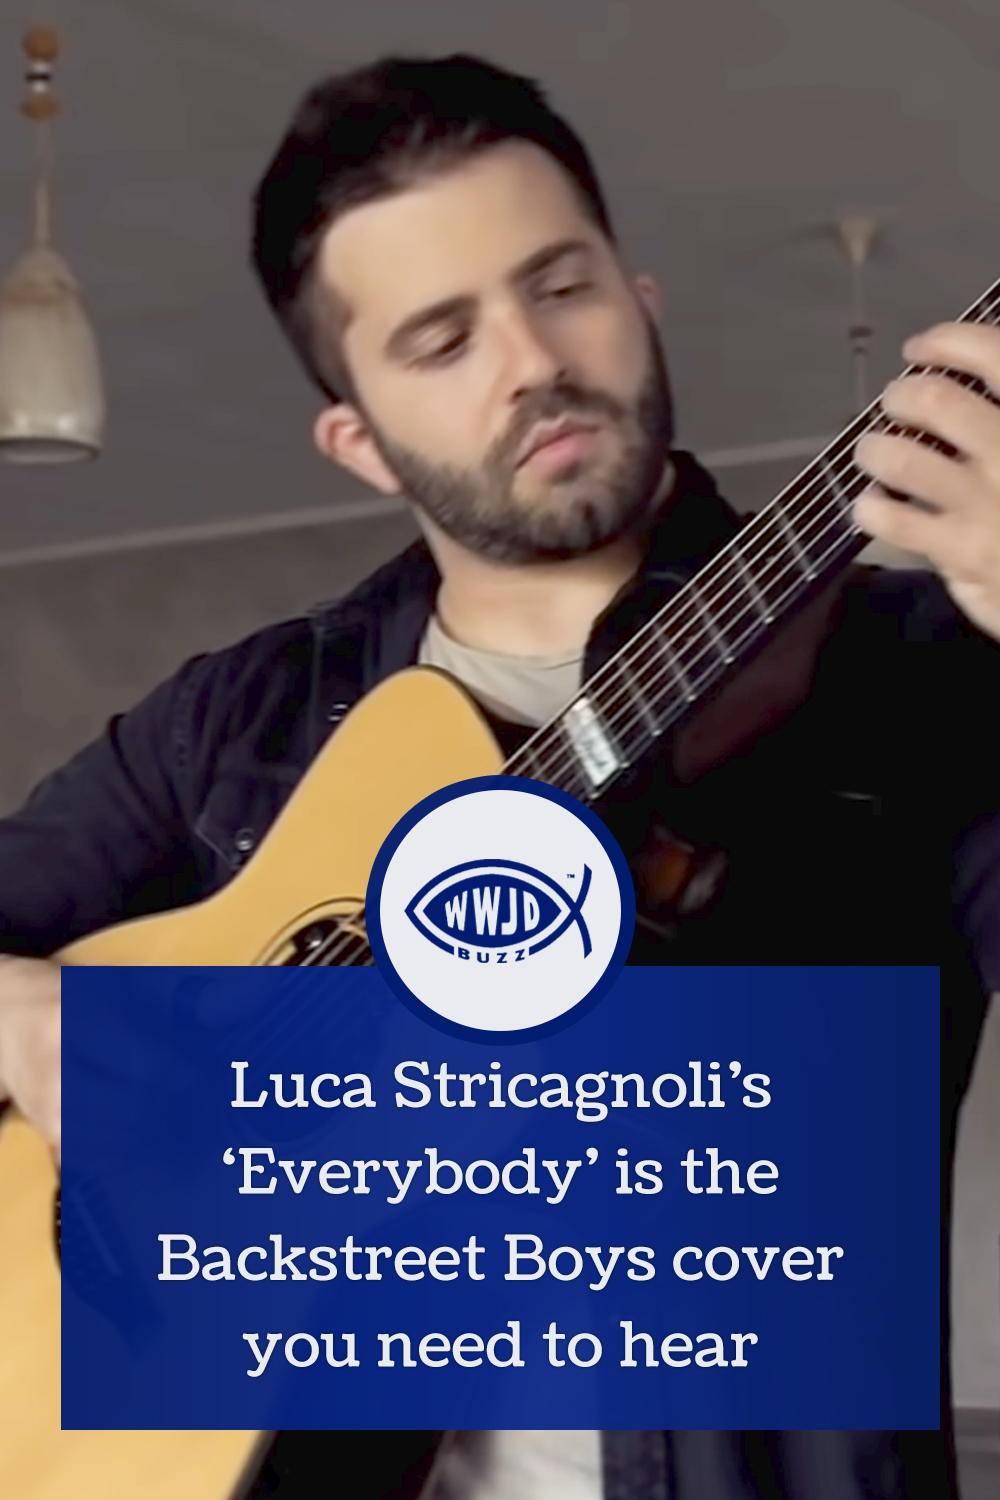 Luca Stricagnoli’s ‘Everybody’ is the Backstreet Boys cover you need to hear